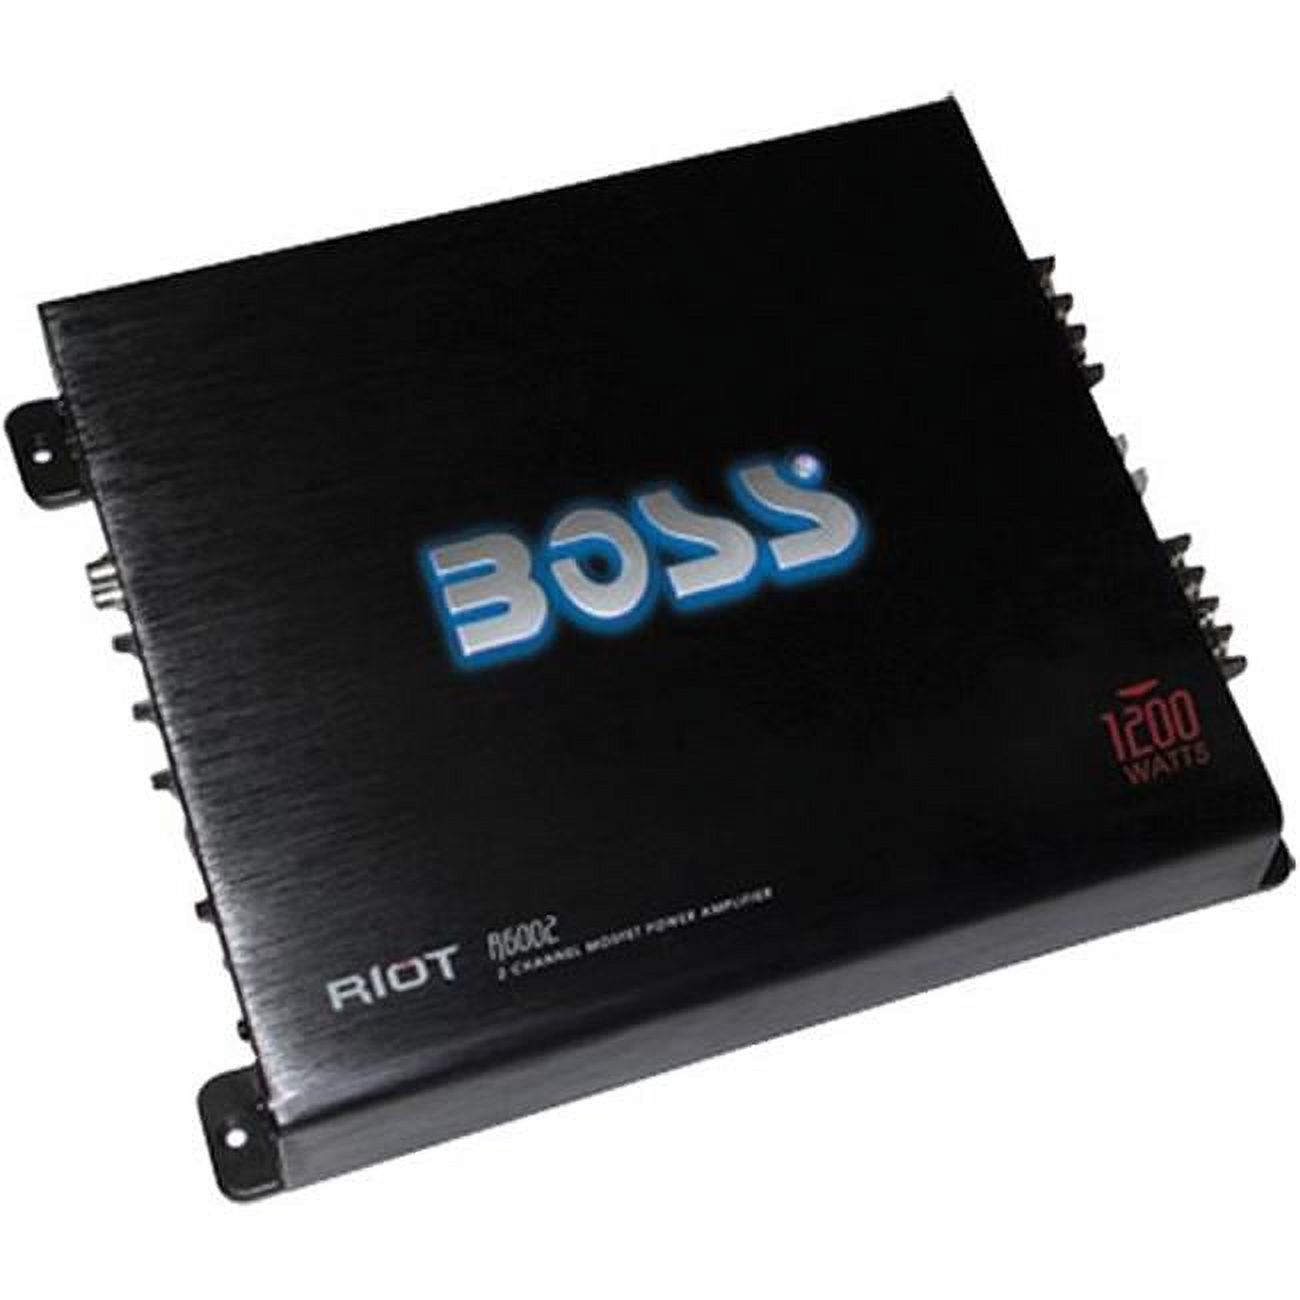 BOSS R6002 1200W 2-Channel MOSFET Power Car Audio Amplifier Amp + Bass Remote - image 1 of 8